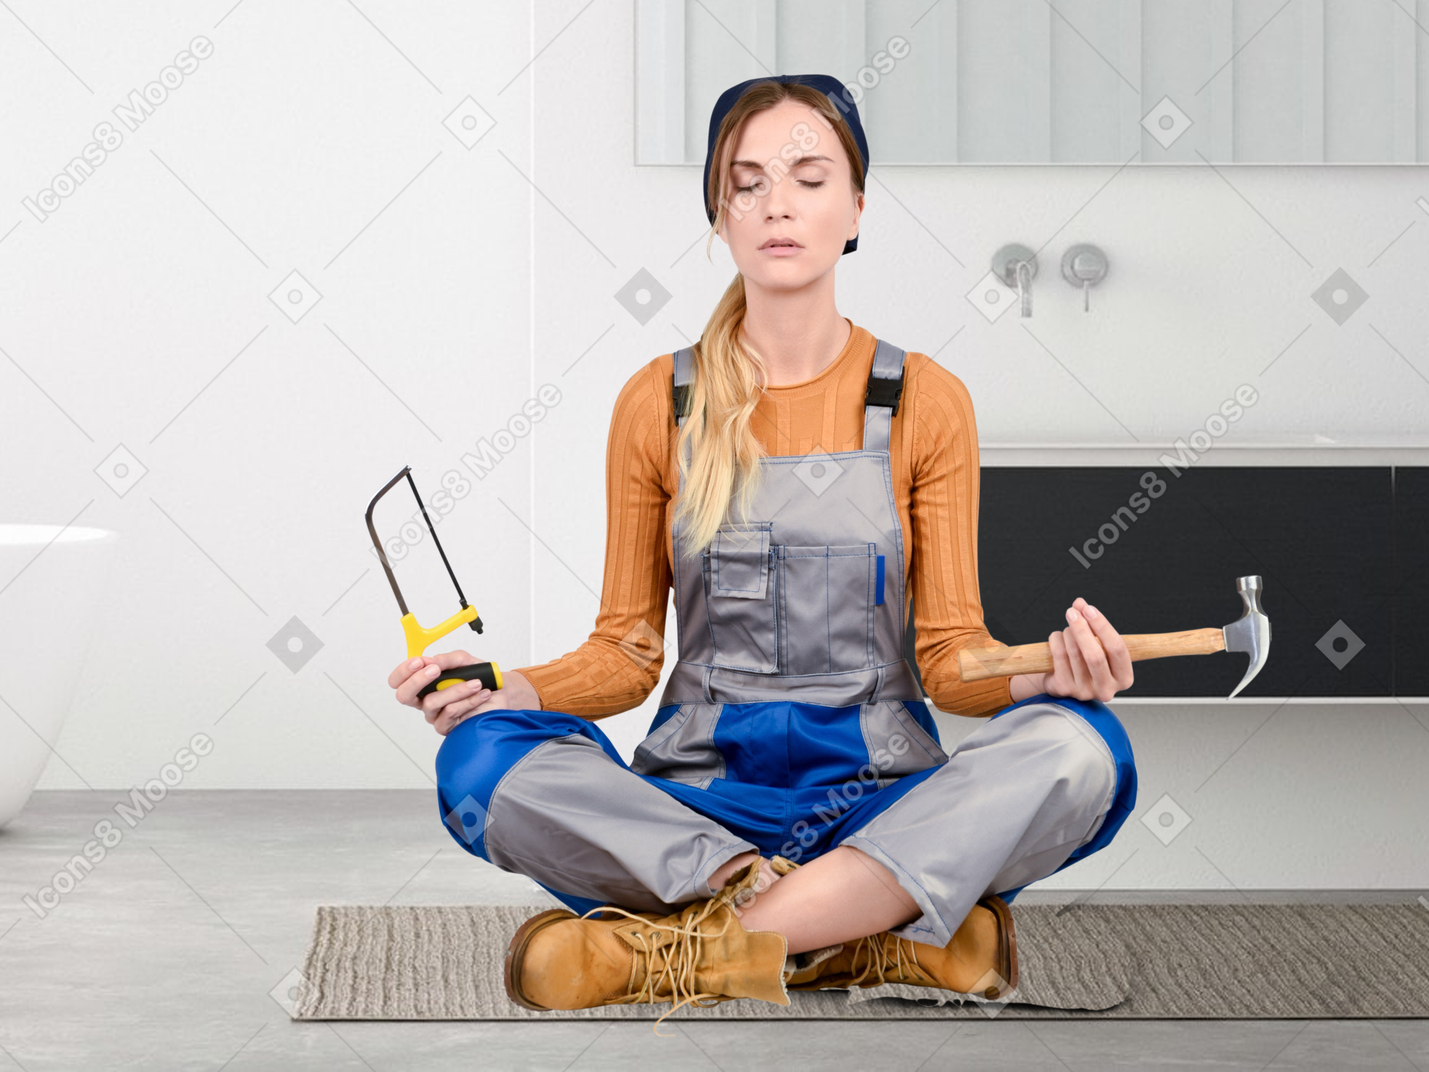 Female worker sitting in a yoga position with hammer and a hacksaw